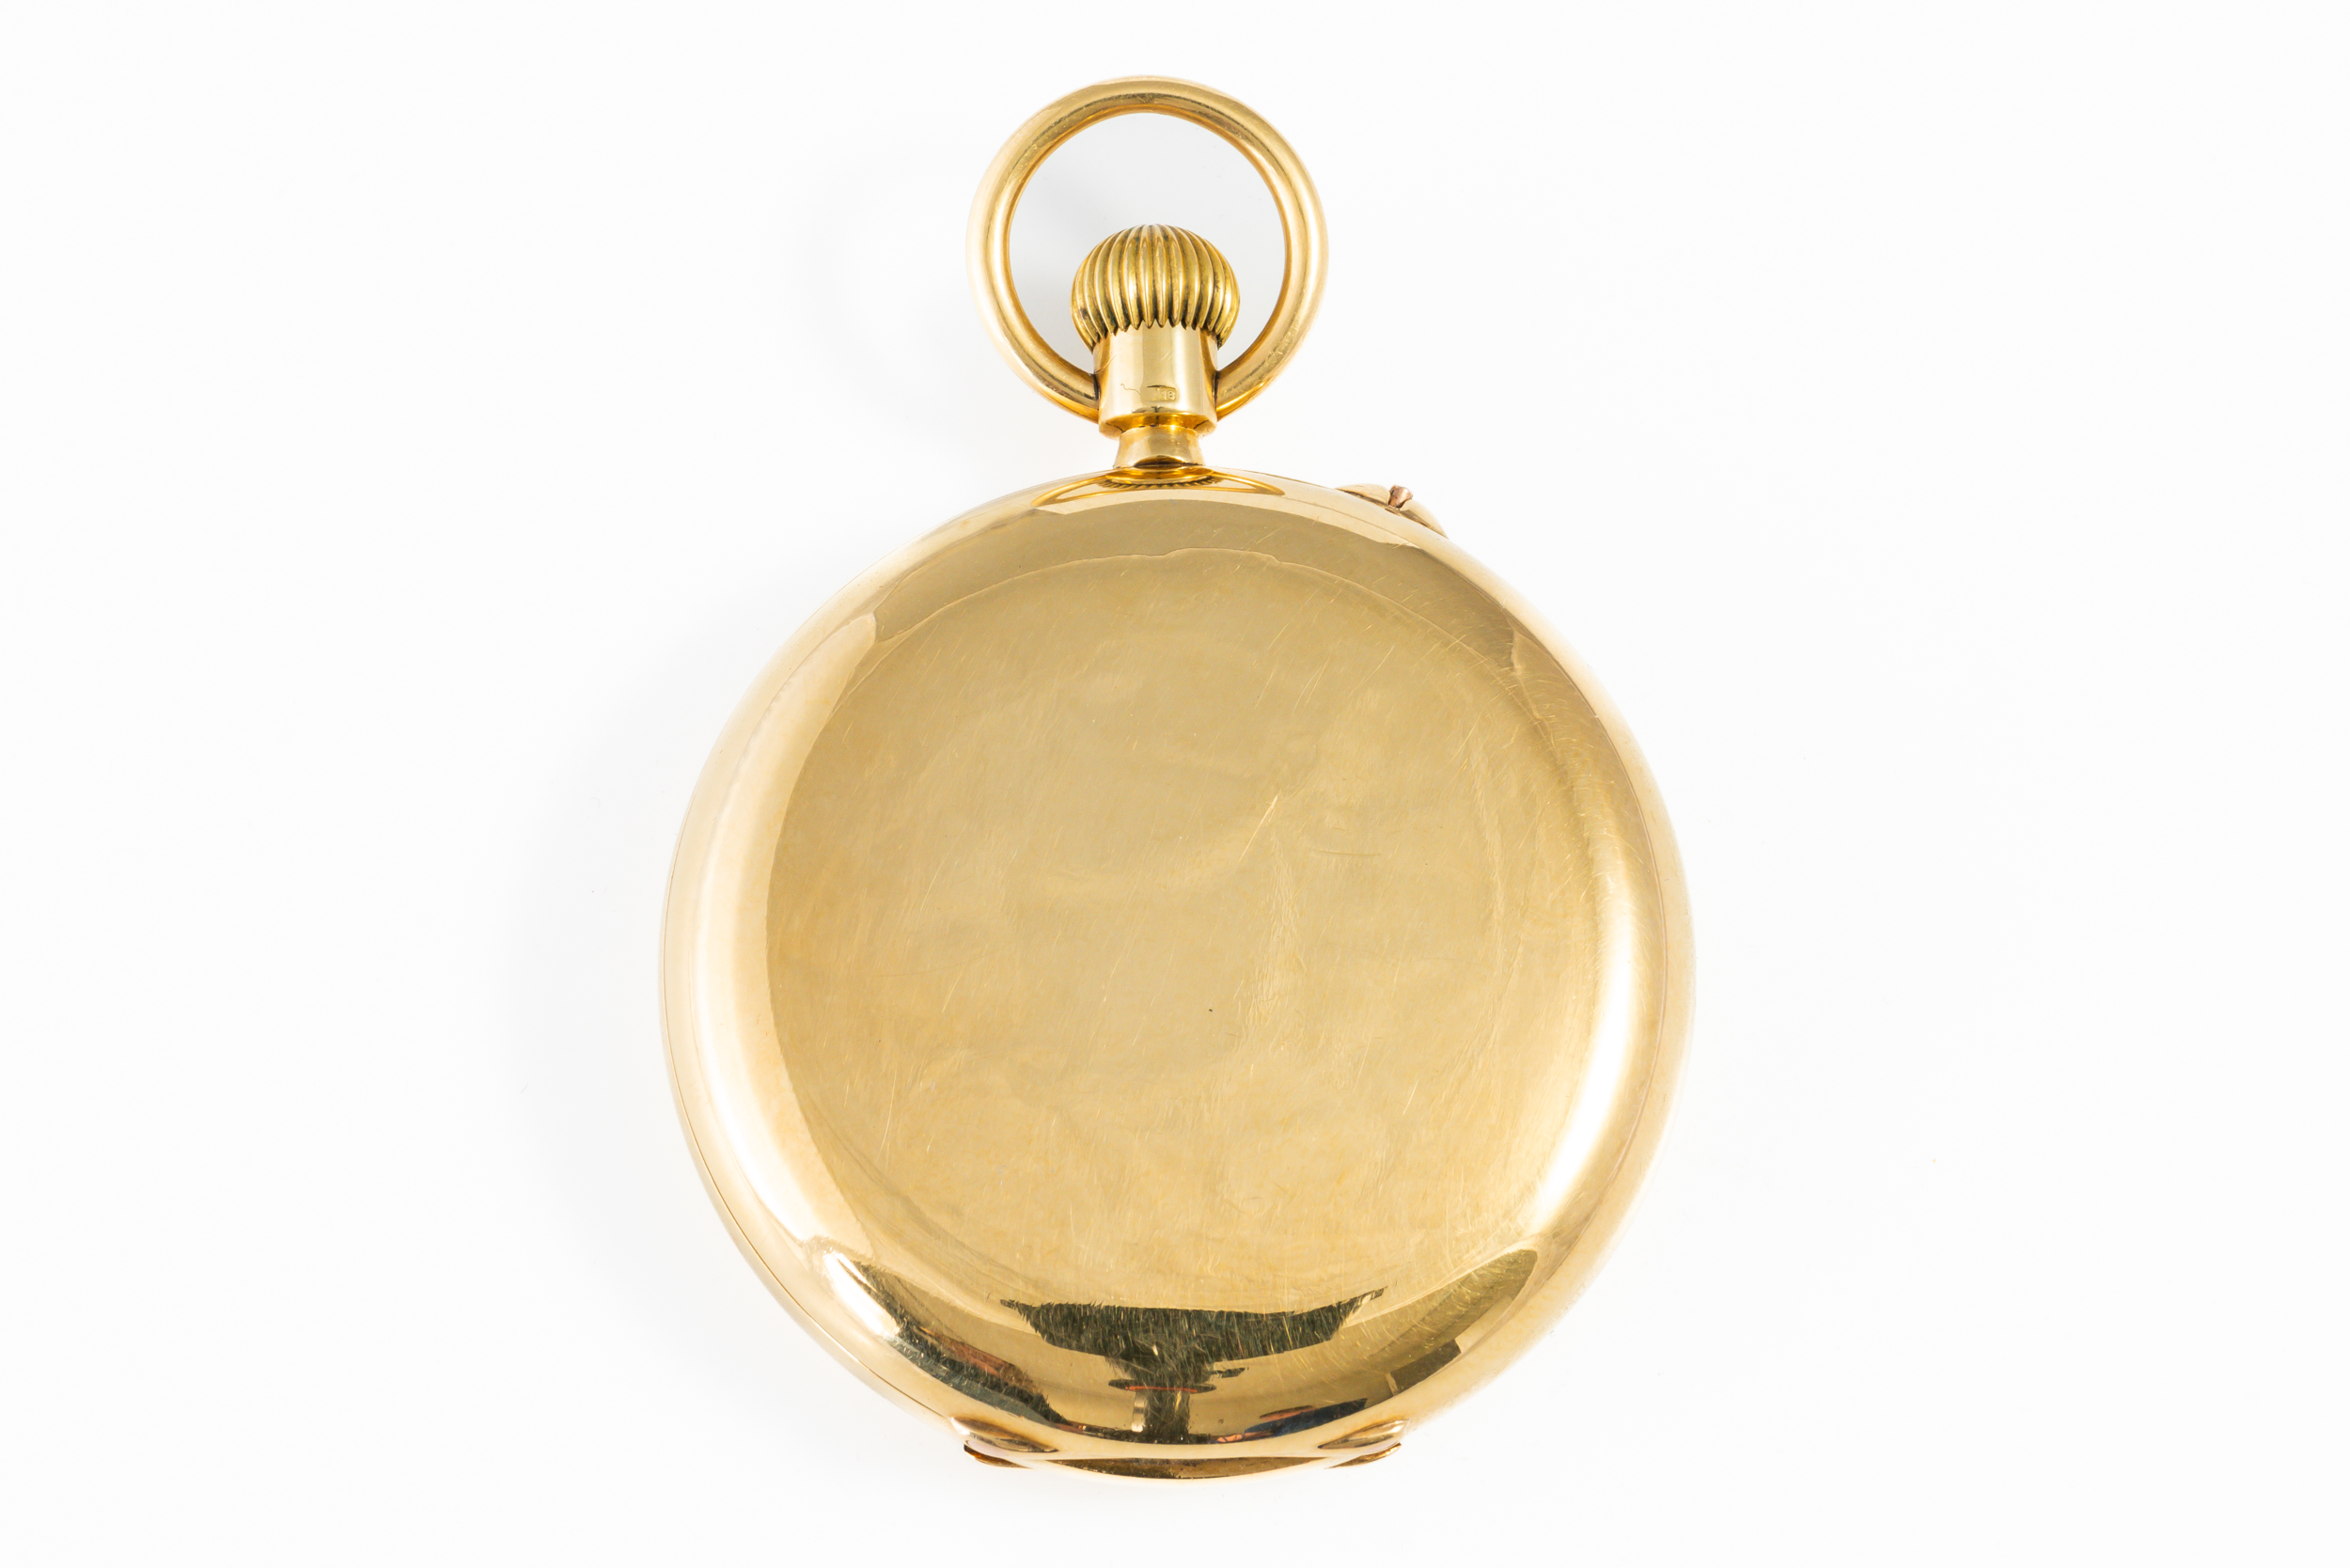 A CHARLES FRODSHAM 18CT GOLD, KEYLESS WIND HUNTING CASED GENTLEMAN'S POCKET WATCH - Image 2 of 4